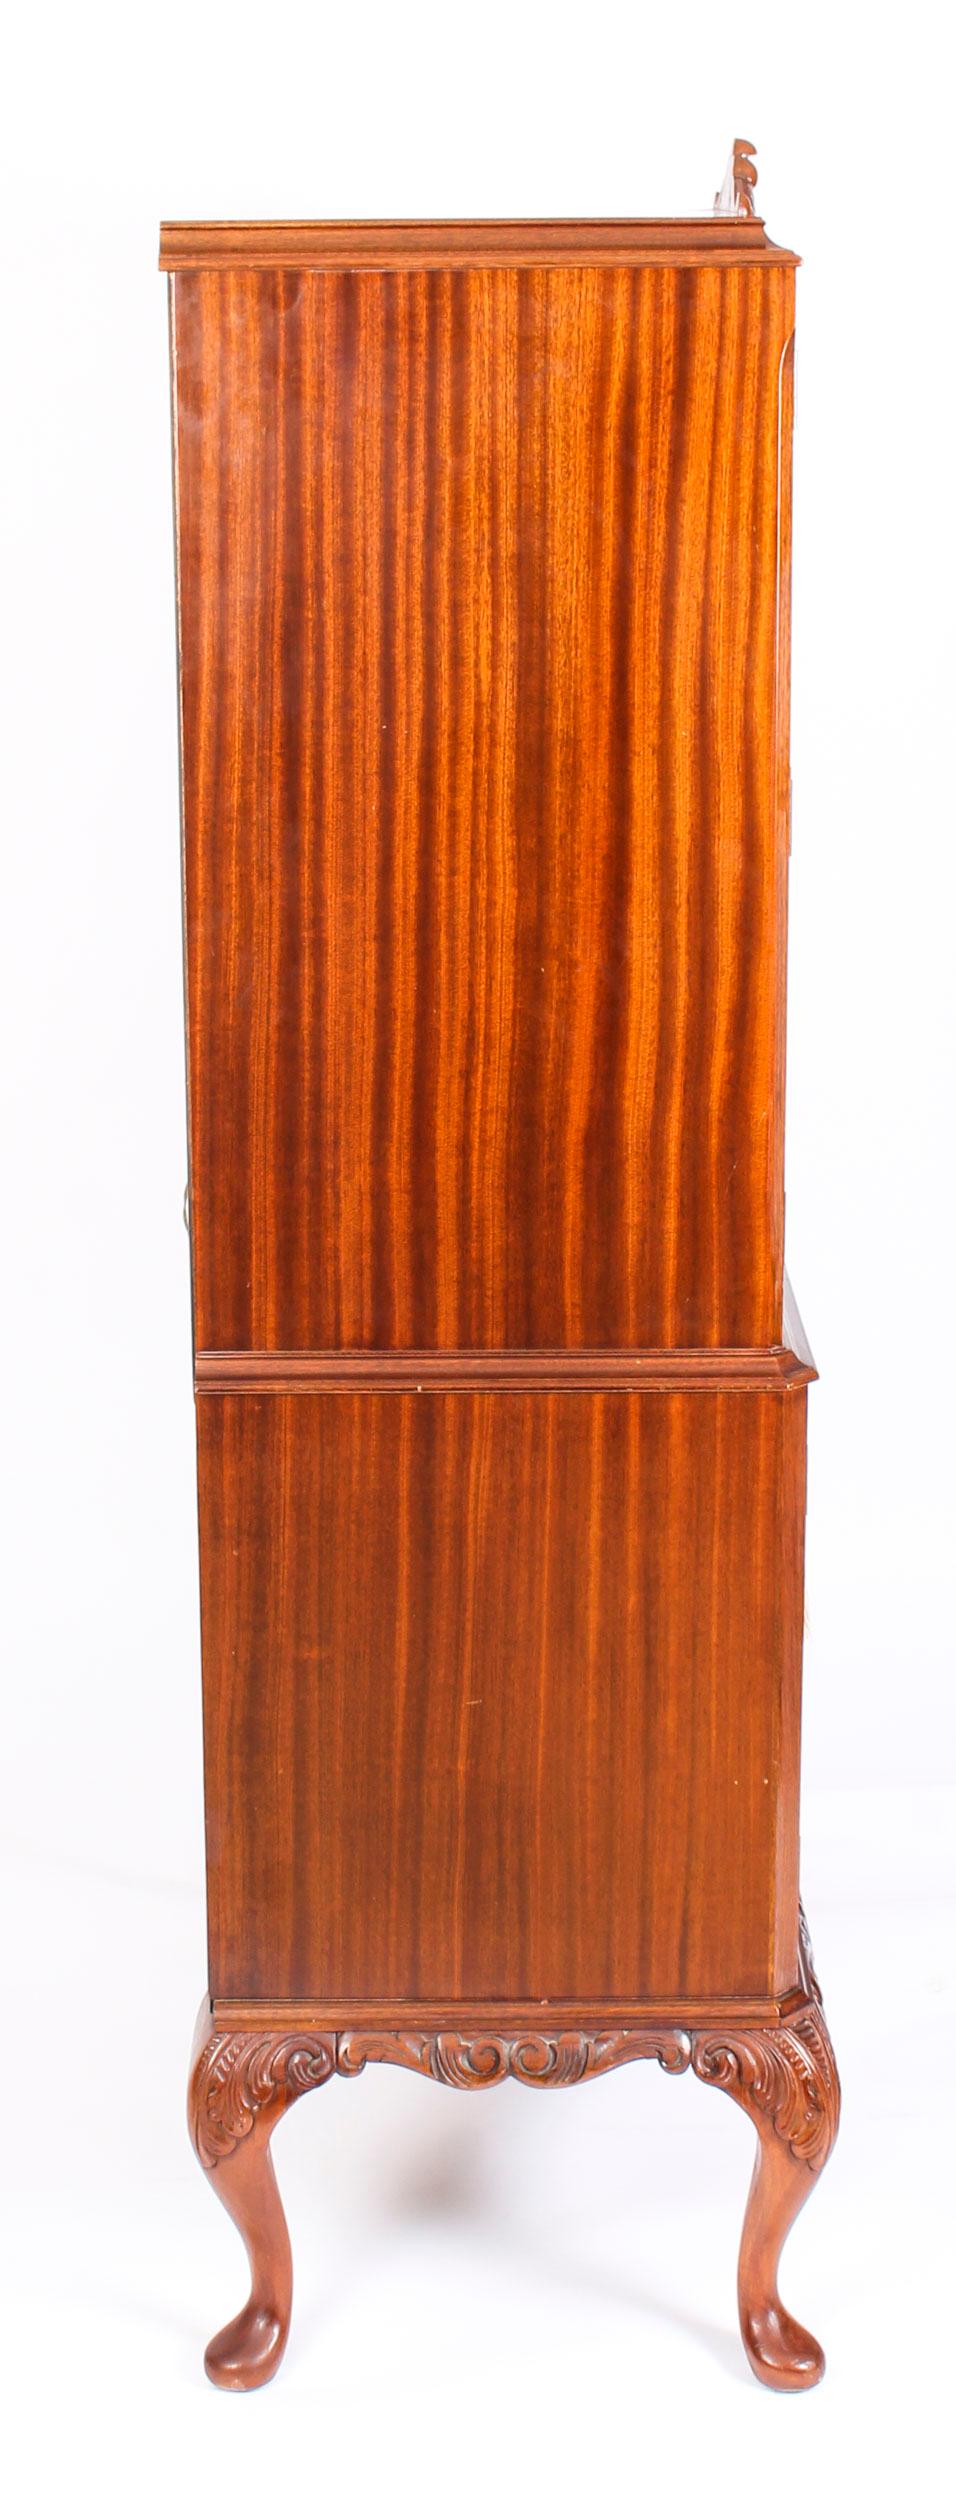 Vintage Flame Mahogany Dry Bar Cocktail Cabinet Drinks Midcentury 4